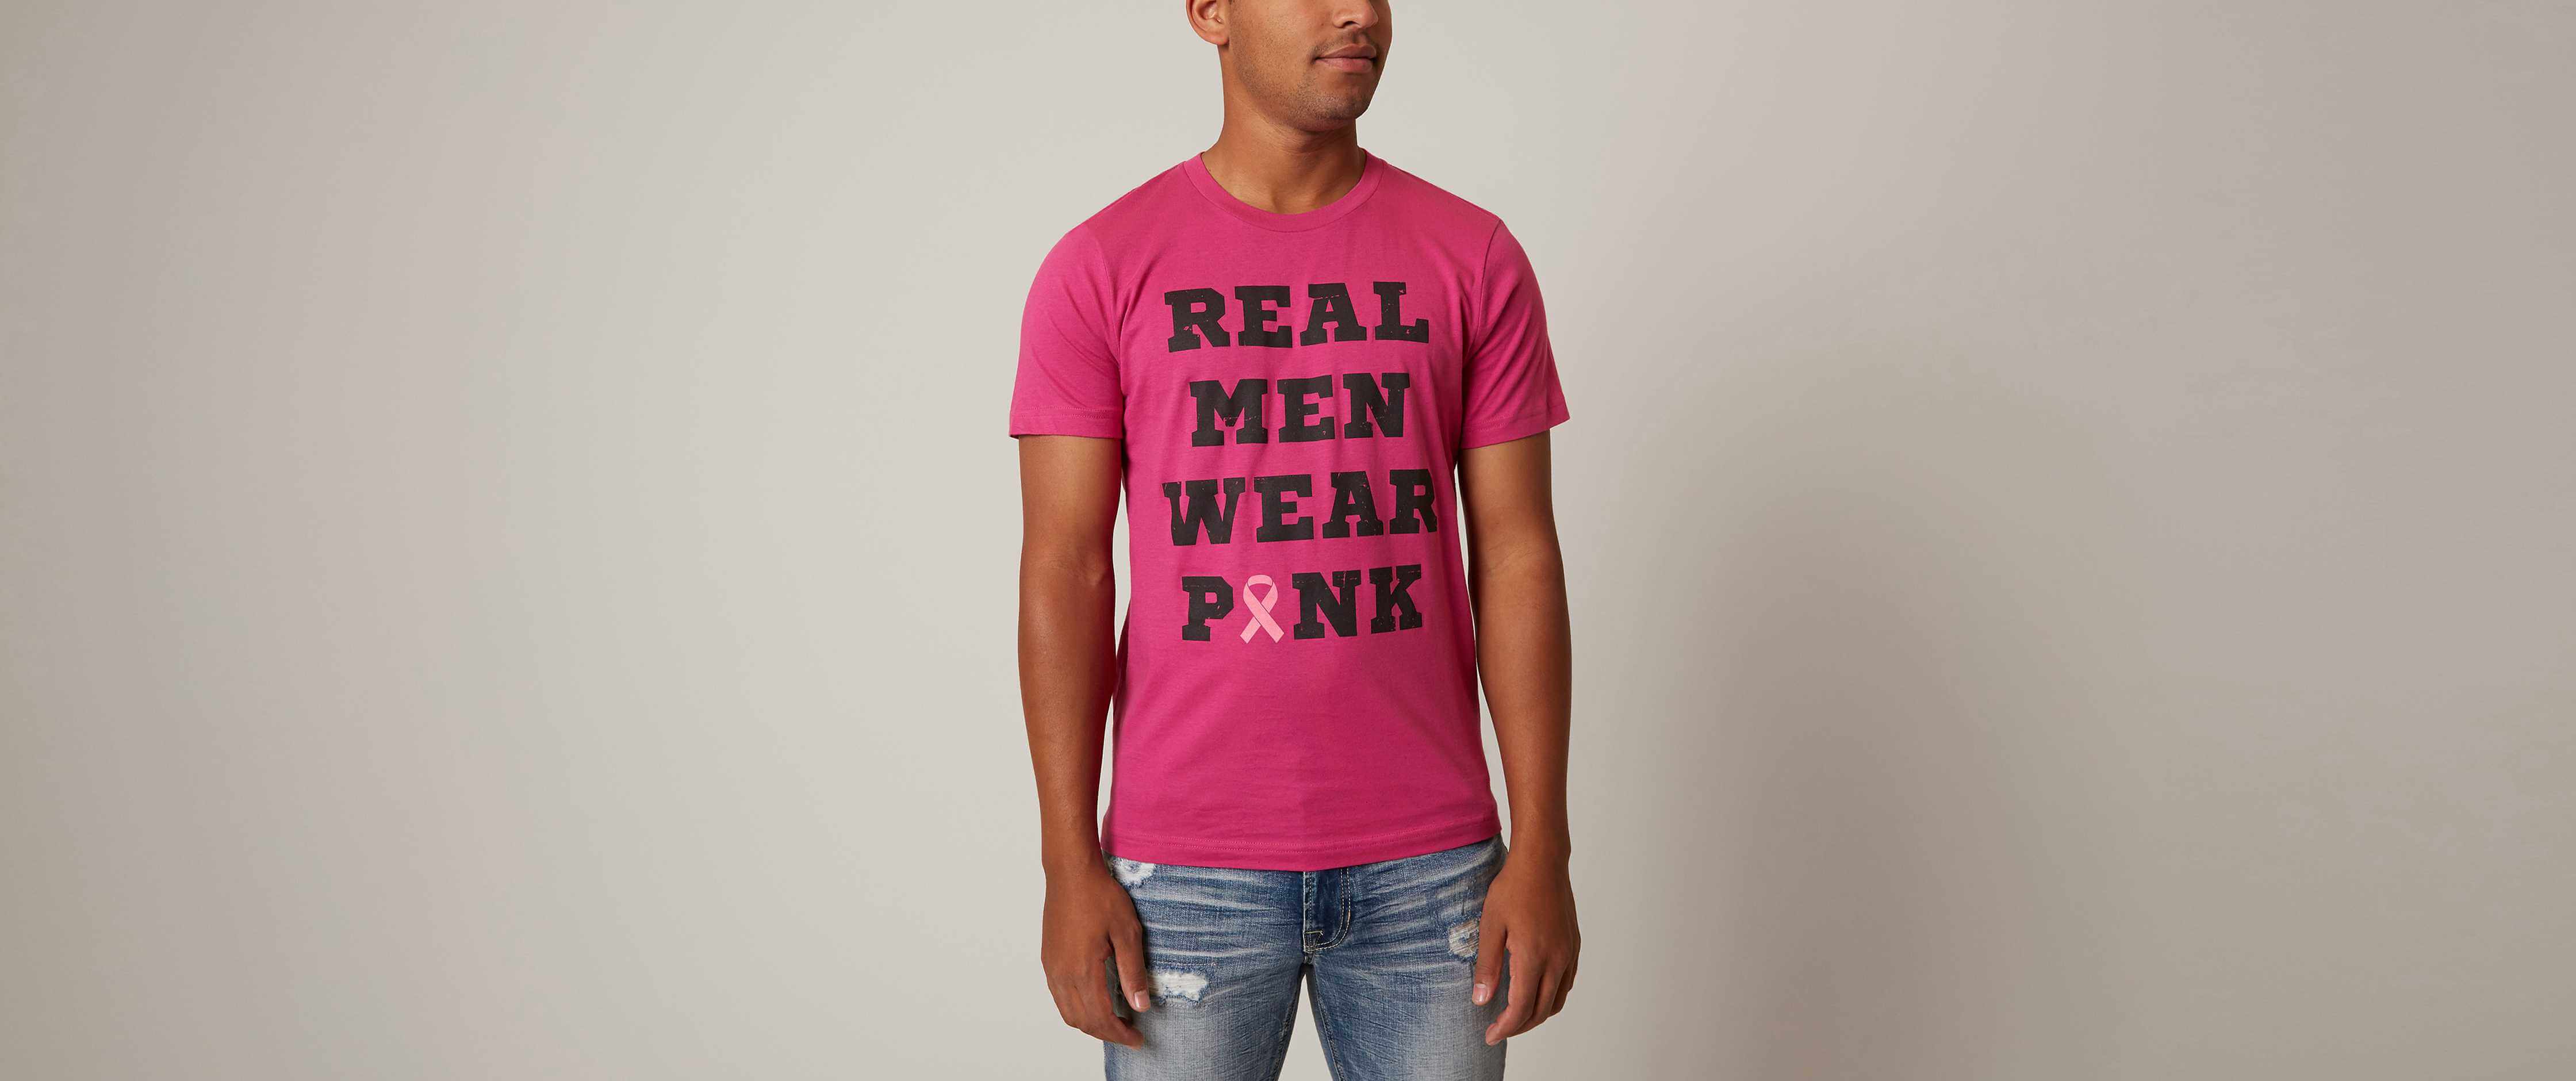 pink t shirt outfit mens